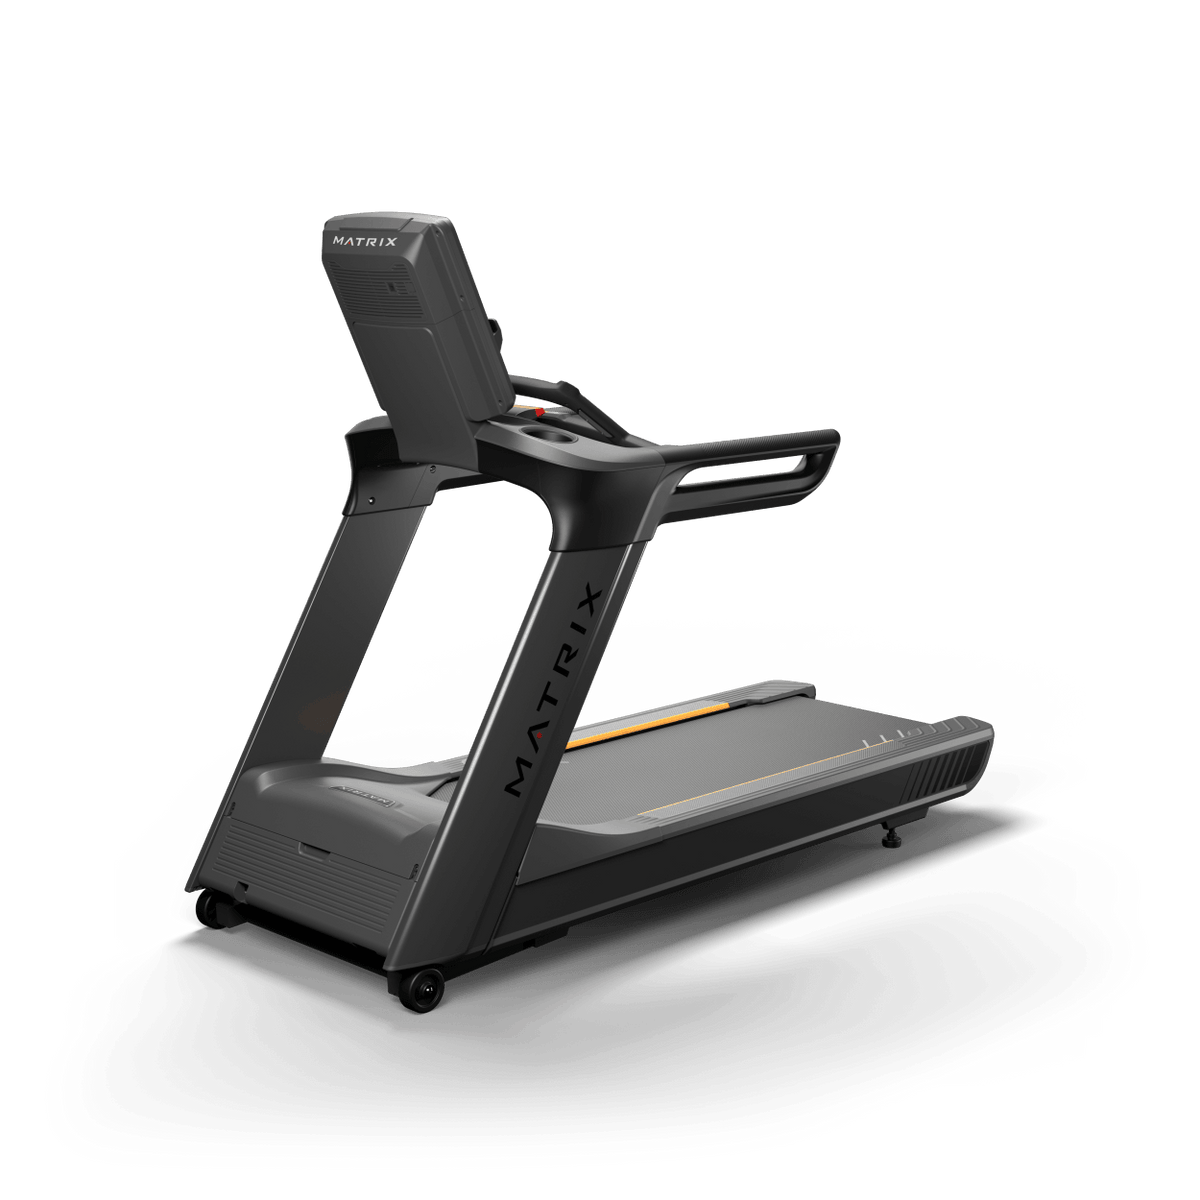 Matrix Fitness Performance Treadmill with Touch Console rear view | Fitness Experience